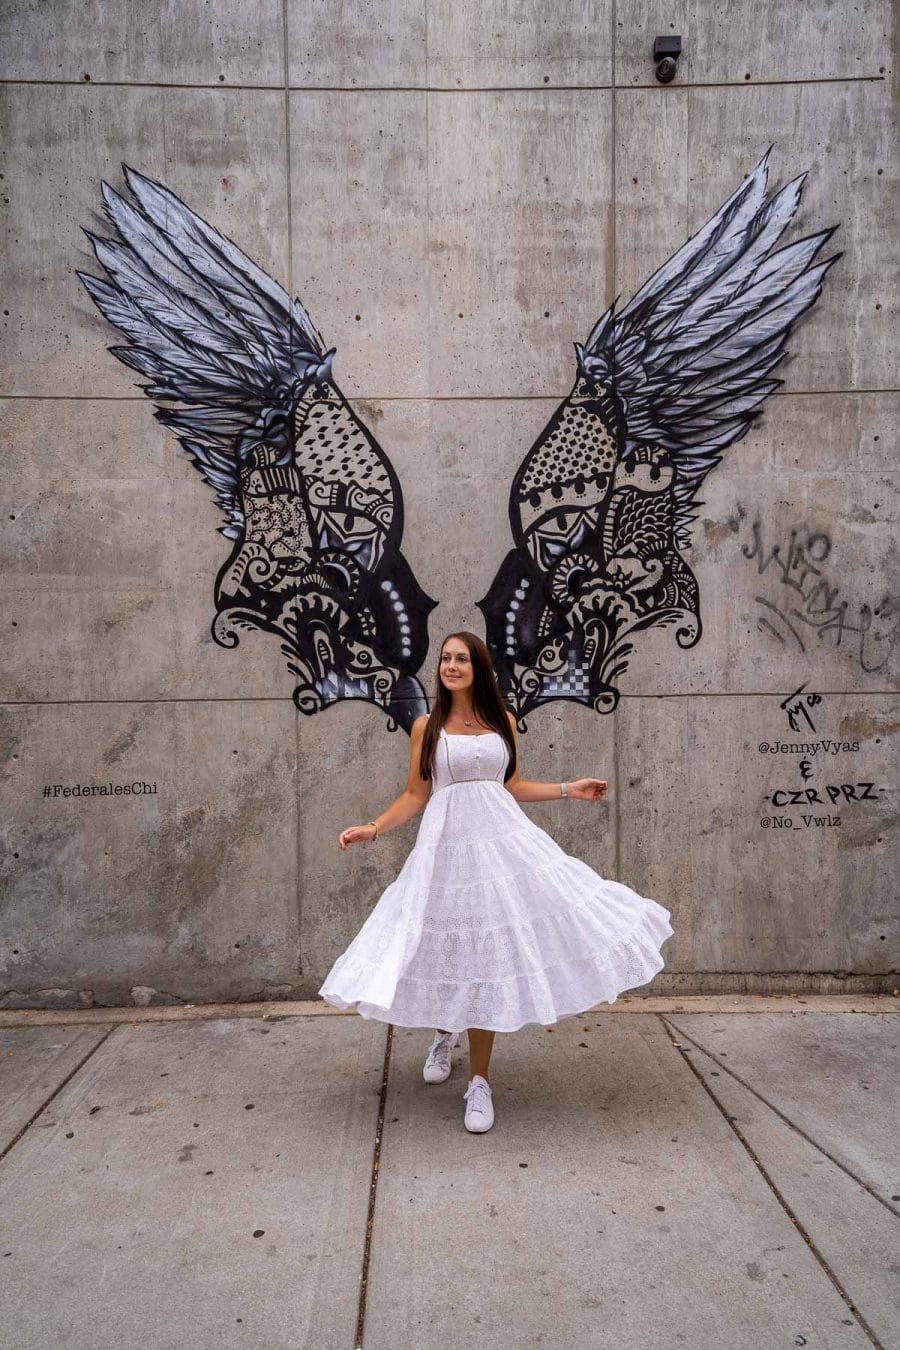 Girl in white dress in front of a Black wing mural in Chicago